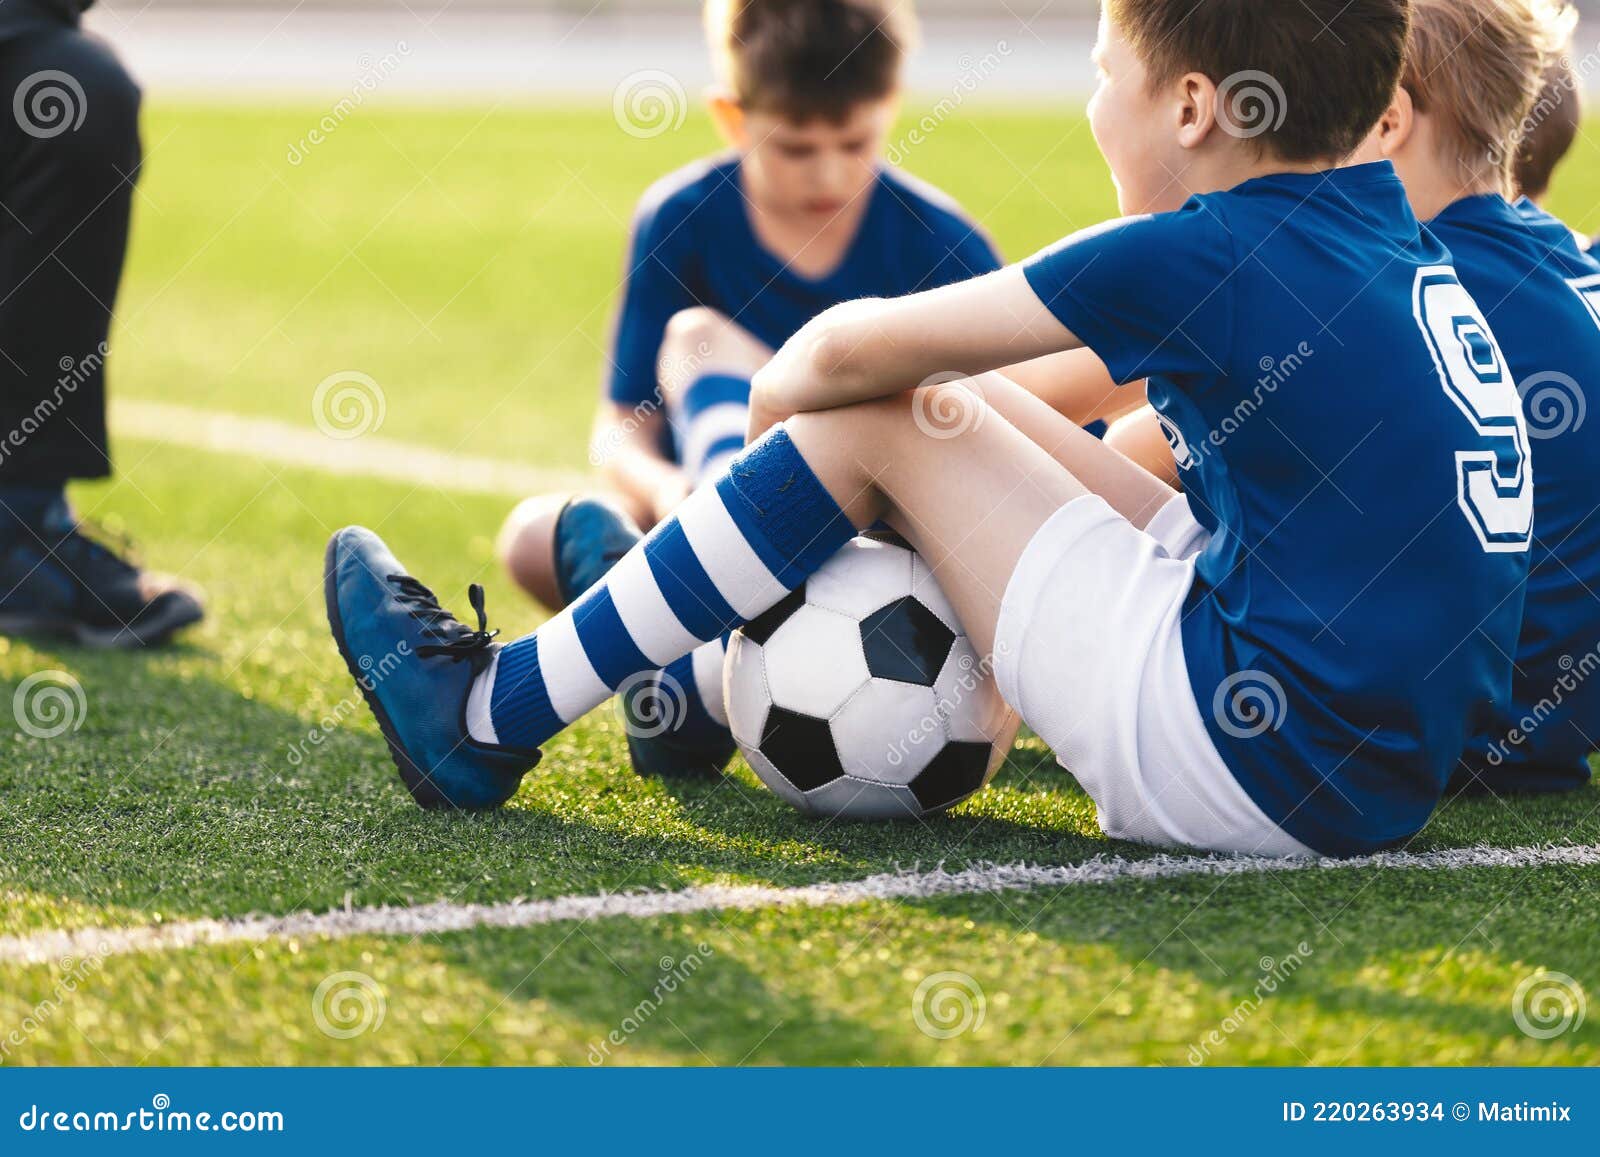 Football Soccer Training Match For Children Stock Photo, Picture and  Royalty Free Image. Image 75254254.